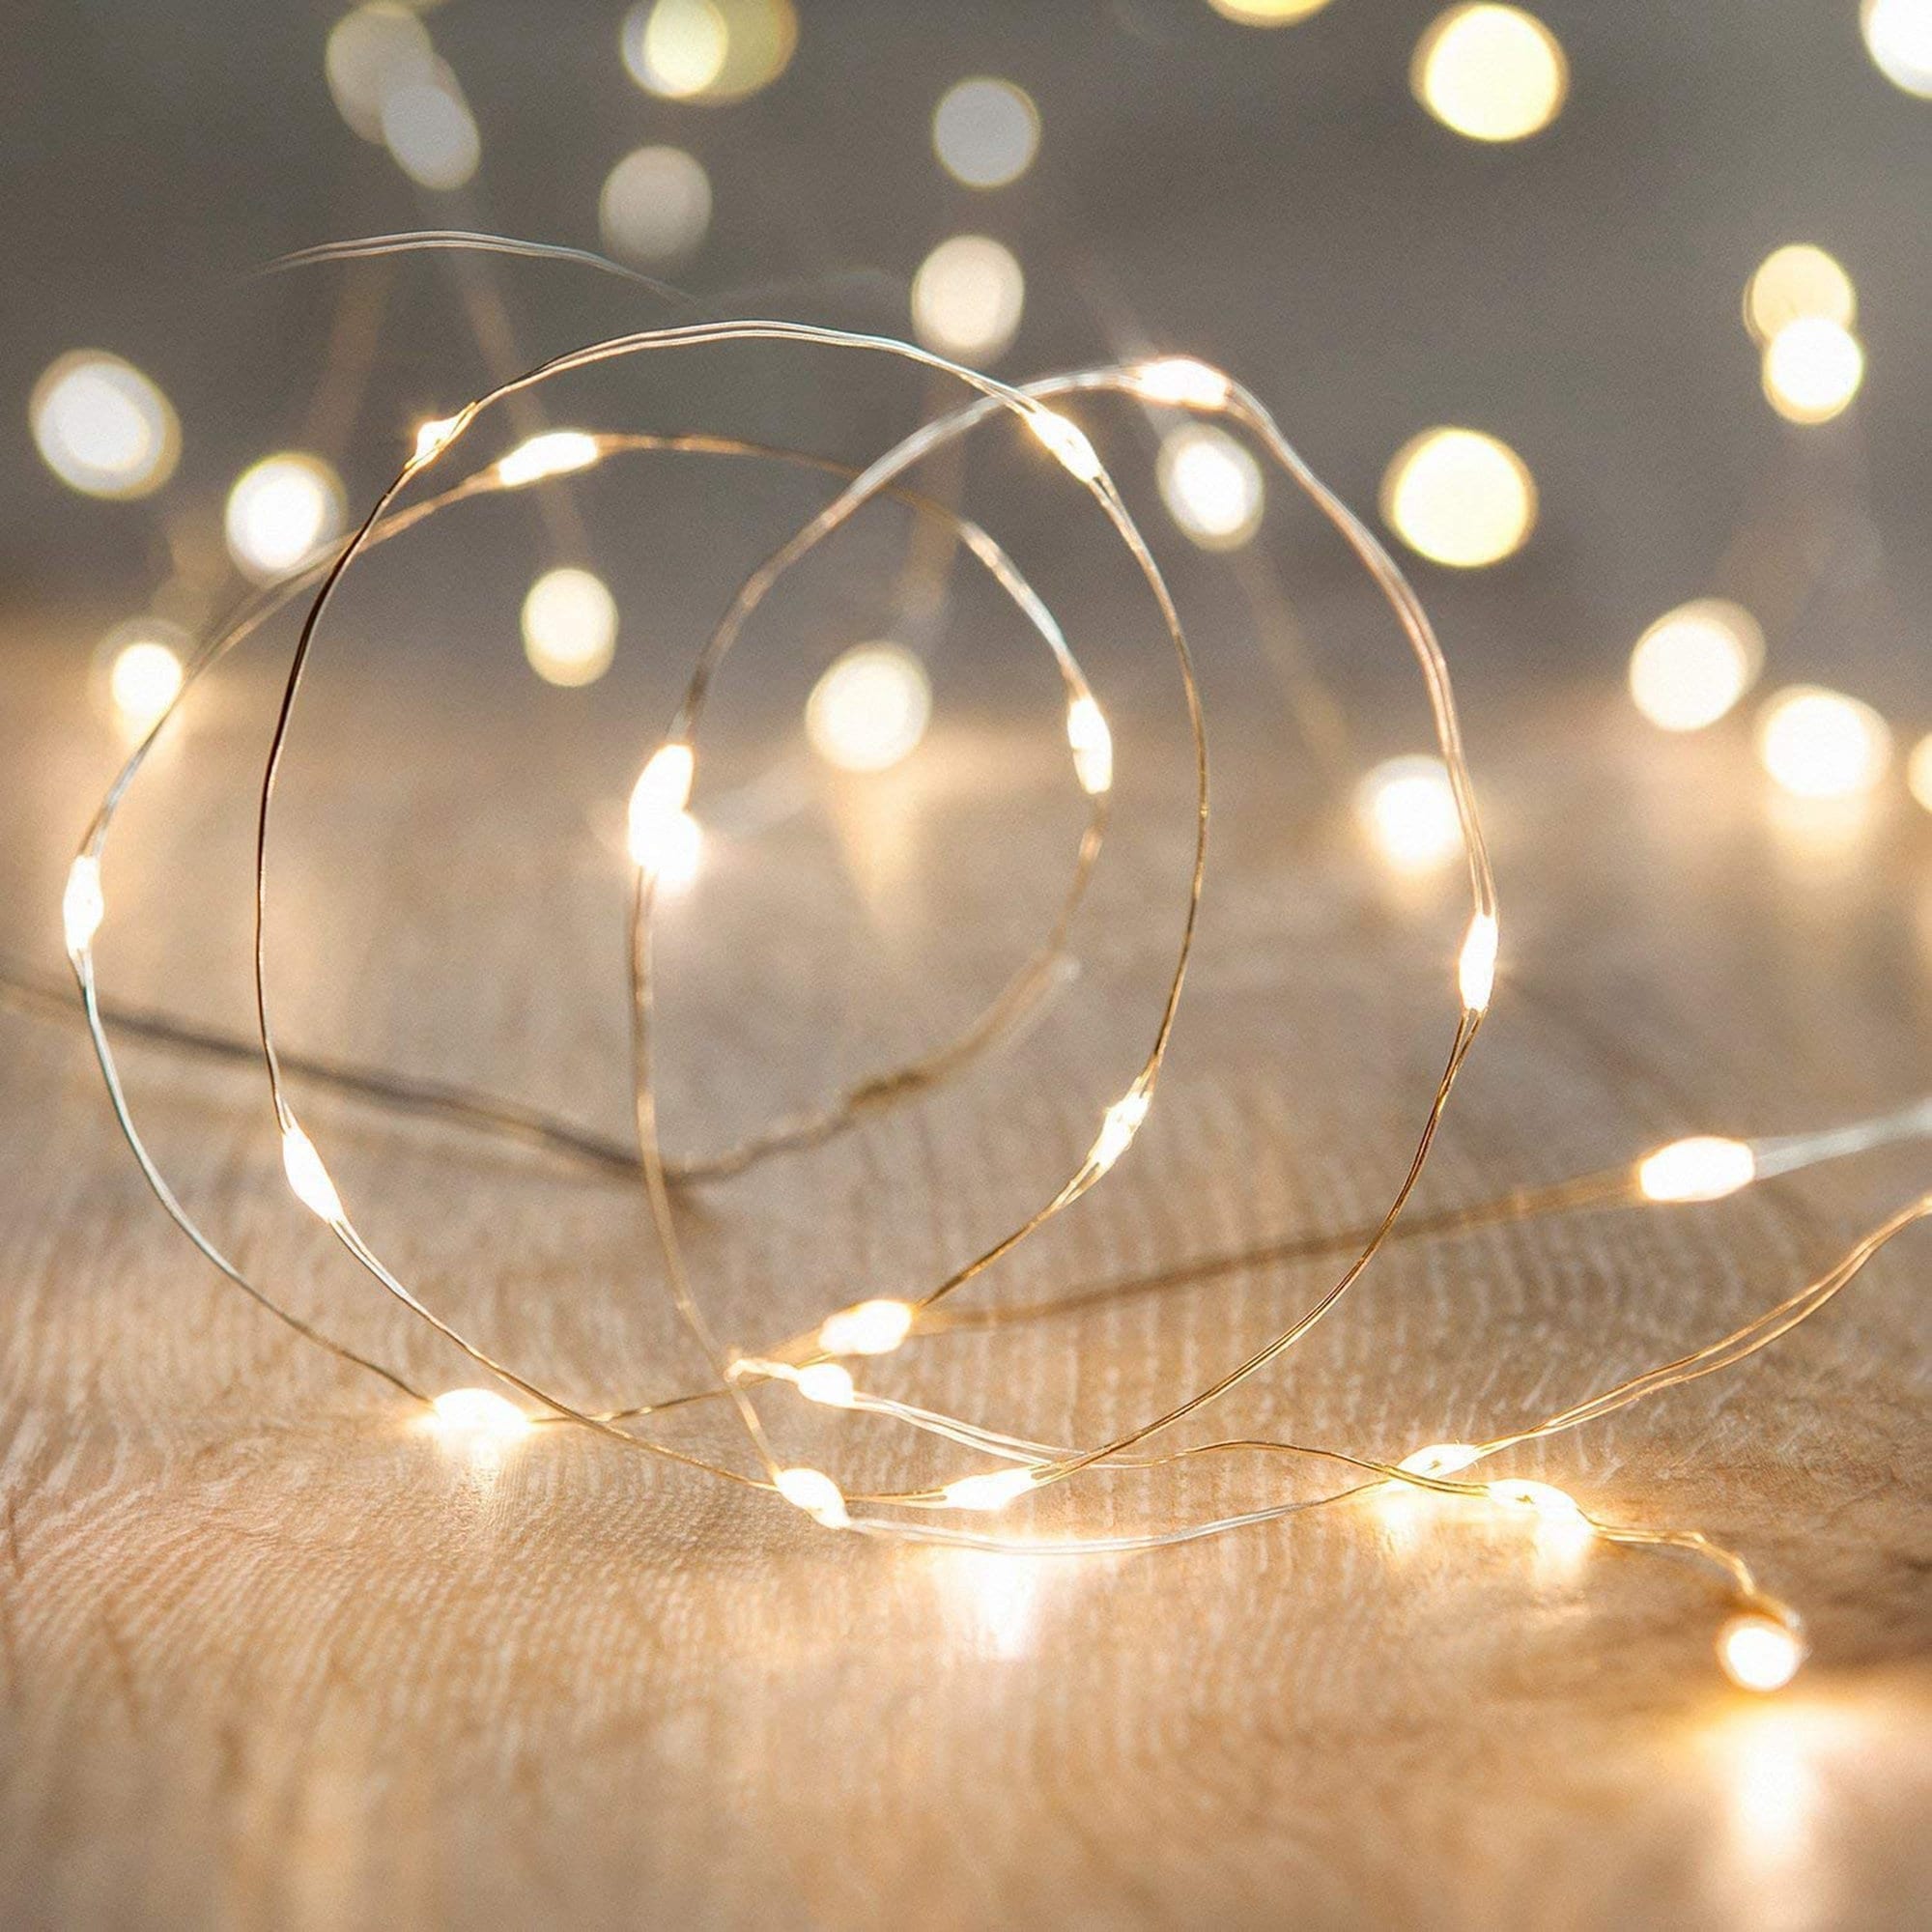 10 Ft 20 LED Photo Clips String Lights Battery Operated Fairy